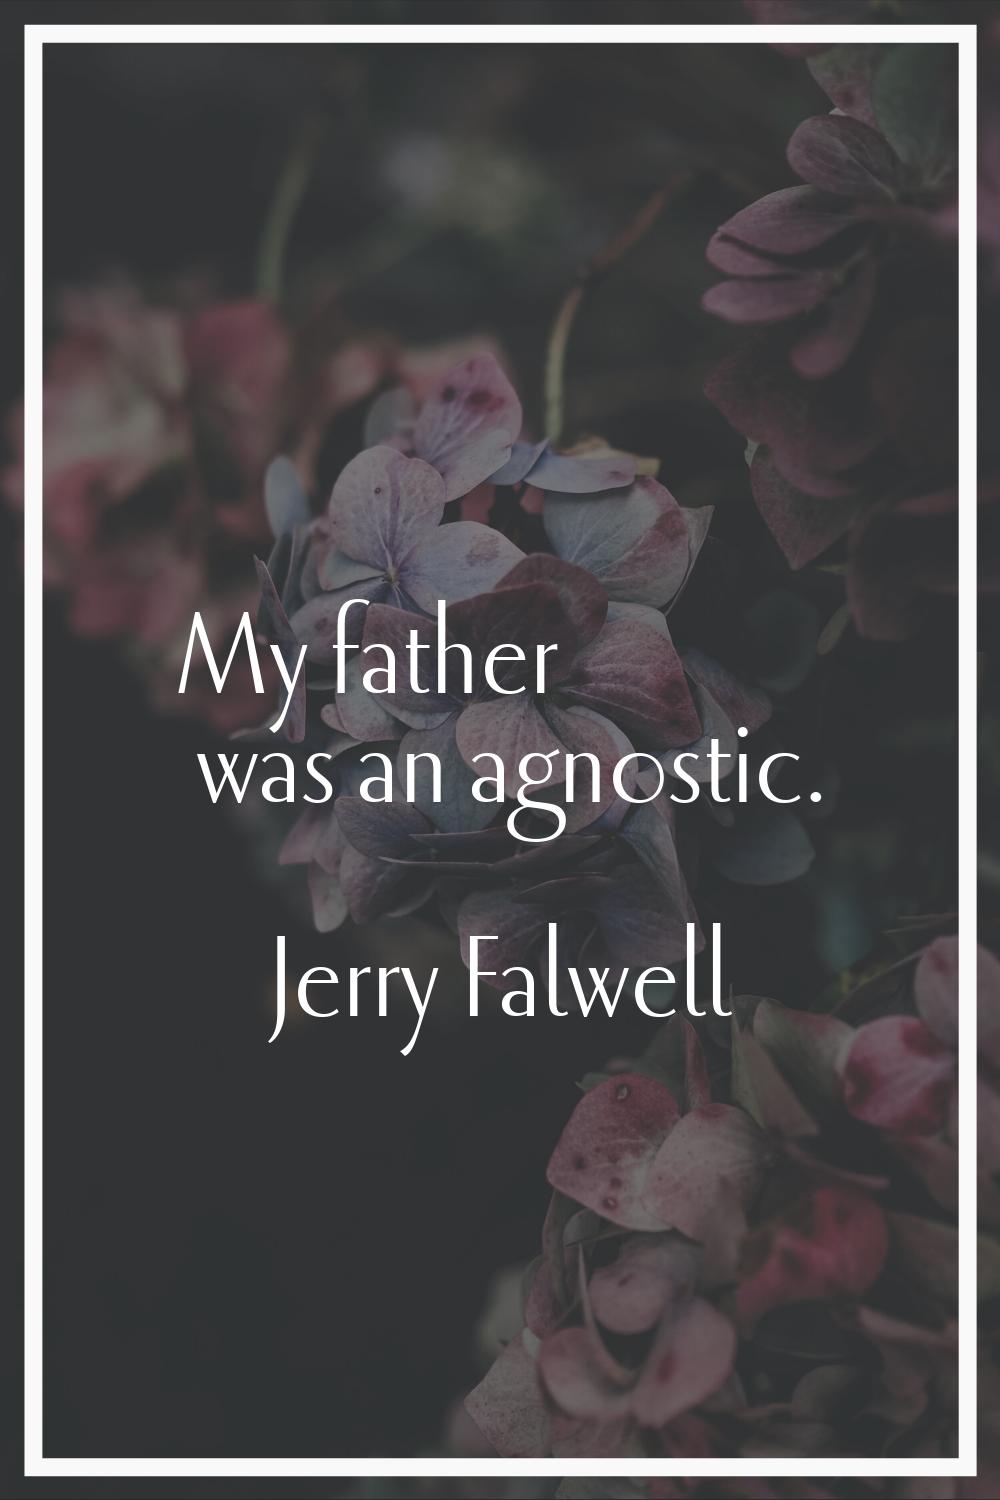 My father was an agnostic.